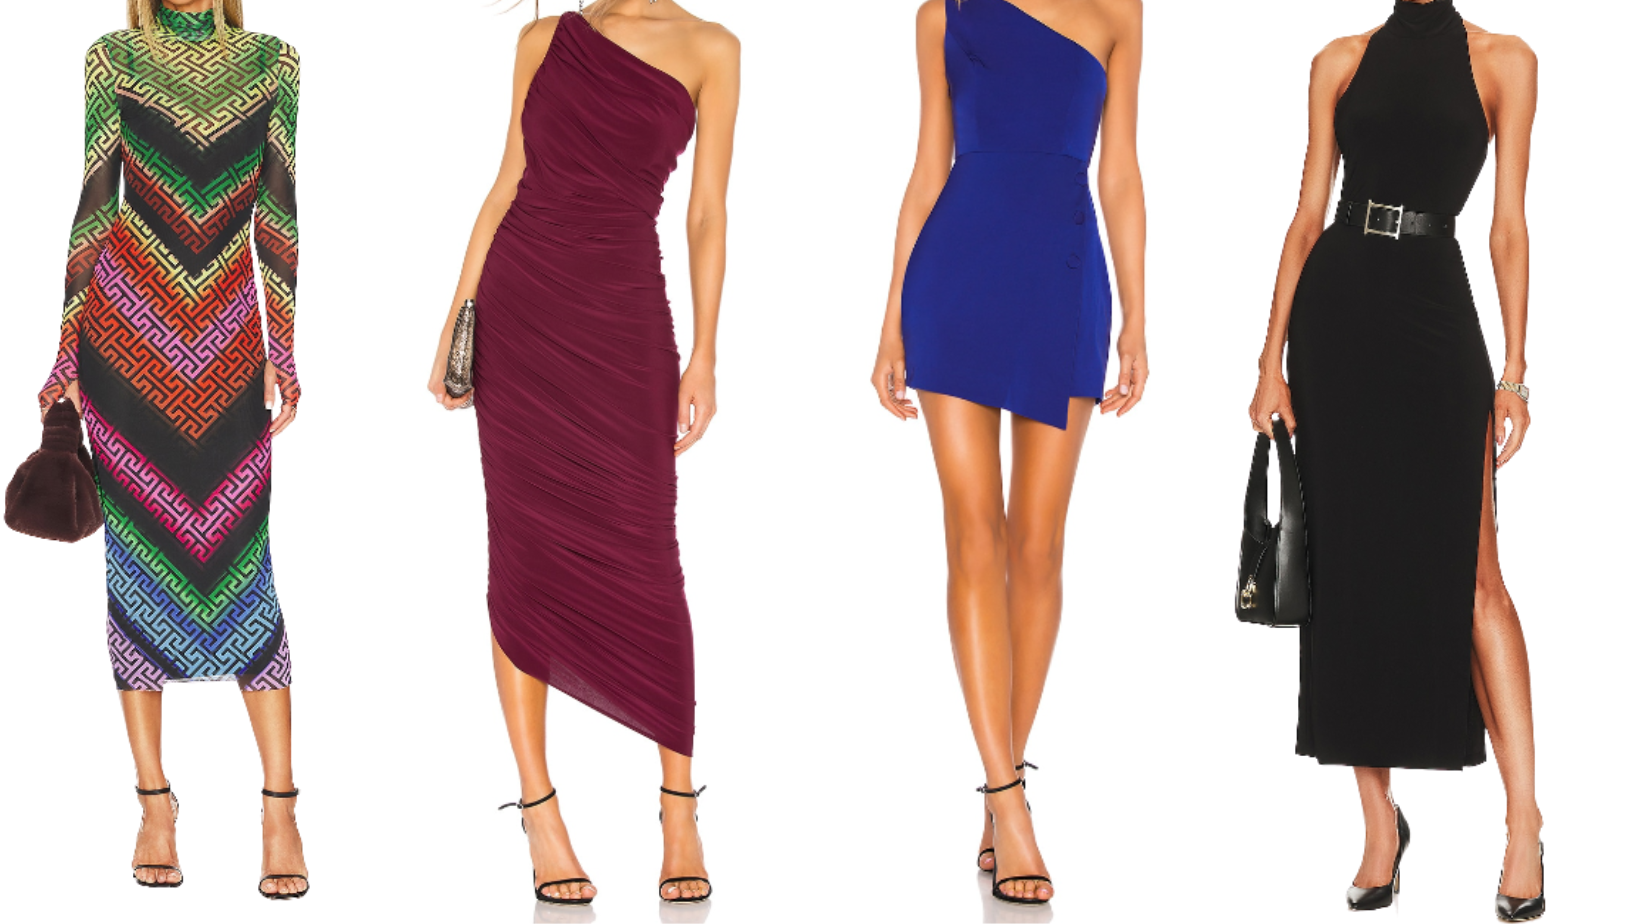 Revolve Best Selling Women’s Dresses You Should Buy Now